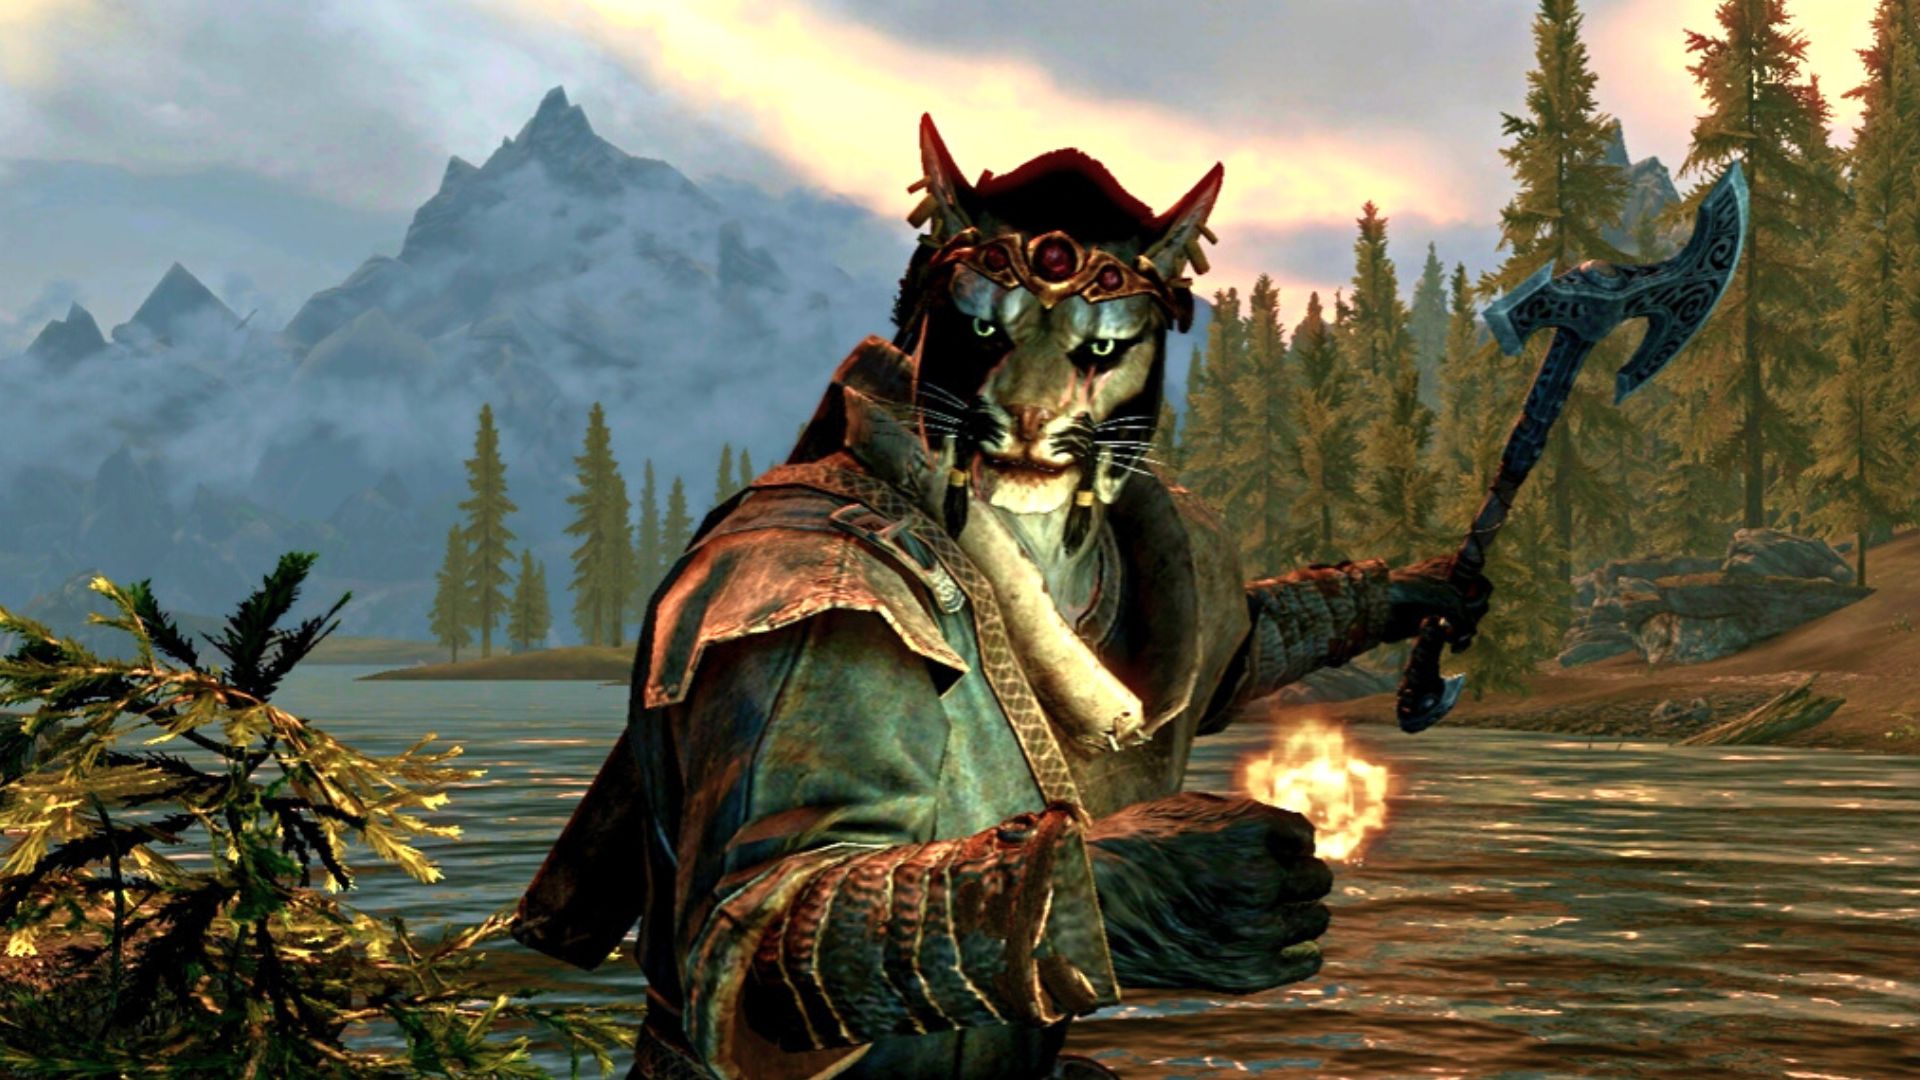 The Elder Scrolls 6 release date estimate and latest news